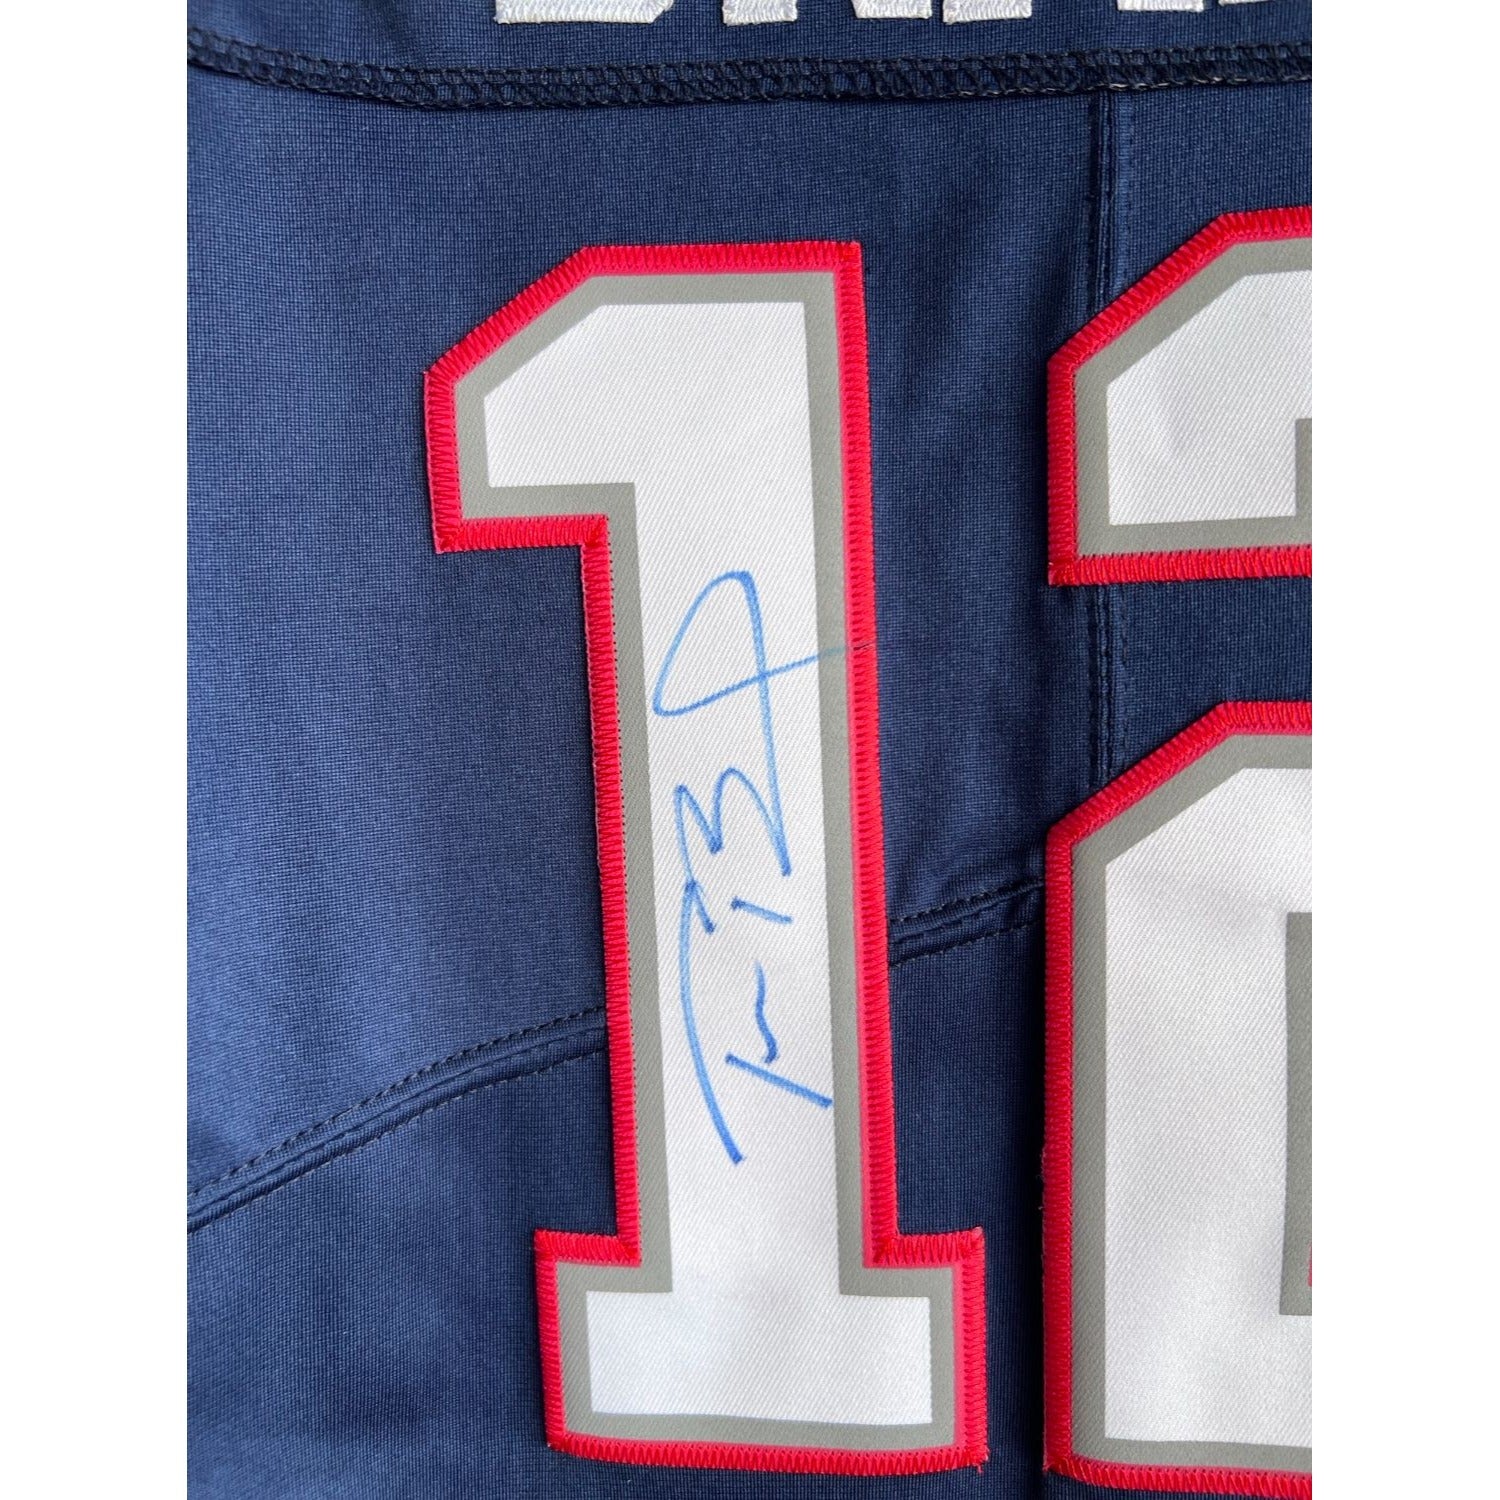 Tom Brady New England Patriots Nike size XL game model jersey signed with proof